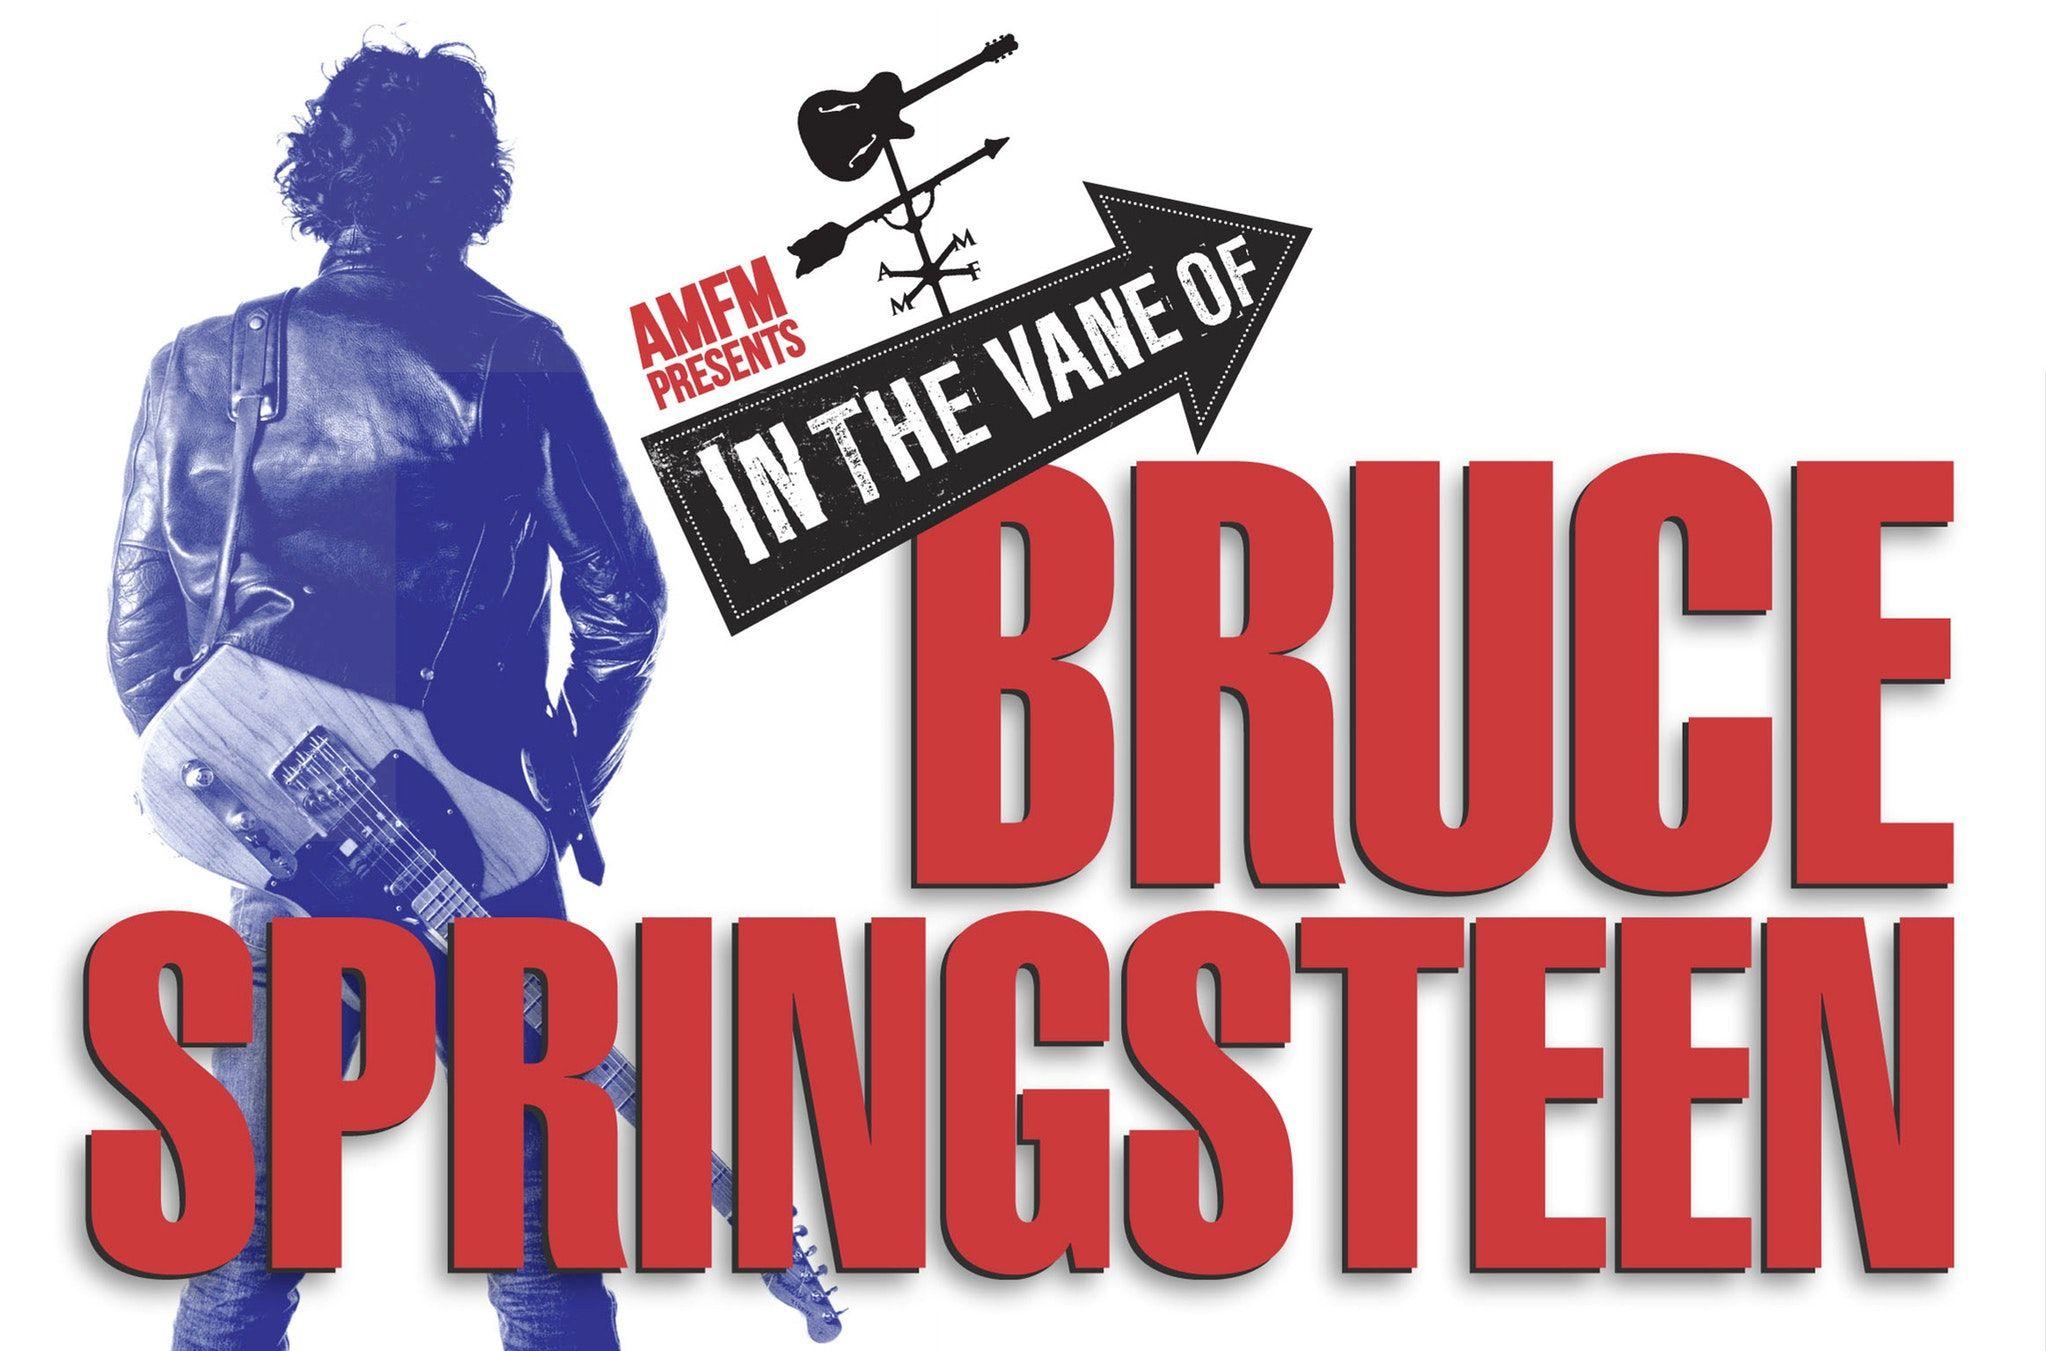 Bruce Springsteen Logo - In The Vane OfBruce Springsteen: Annapolis Artists Playing Tributes